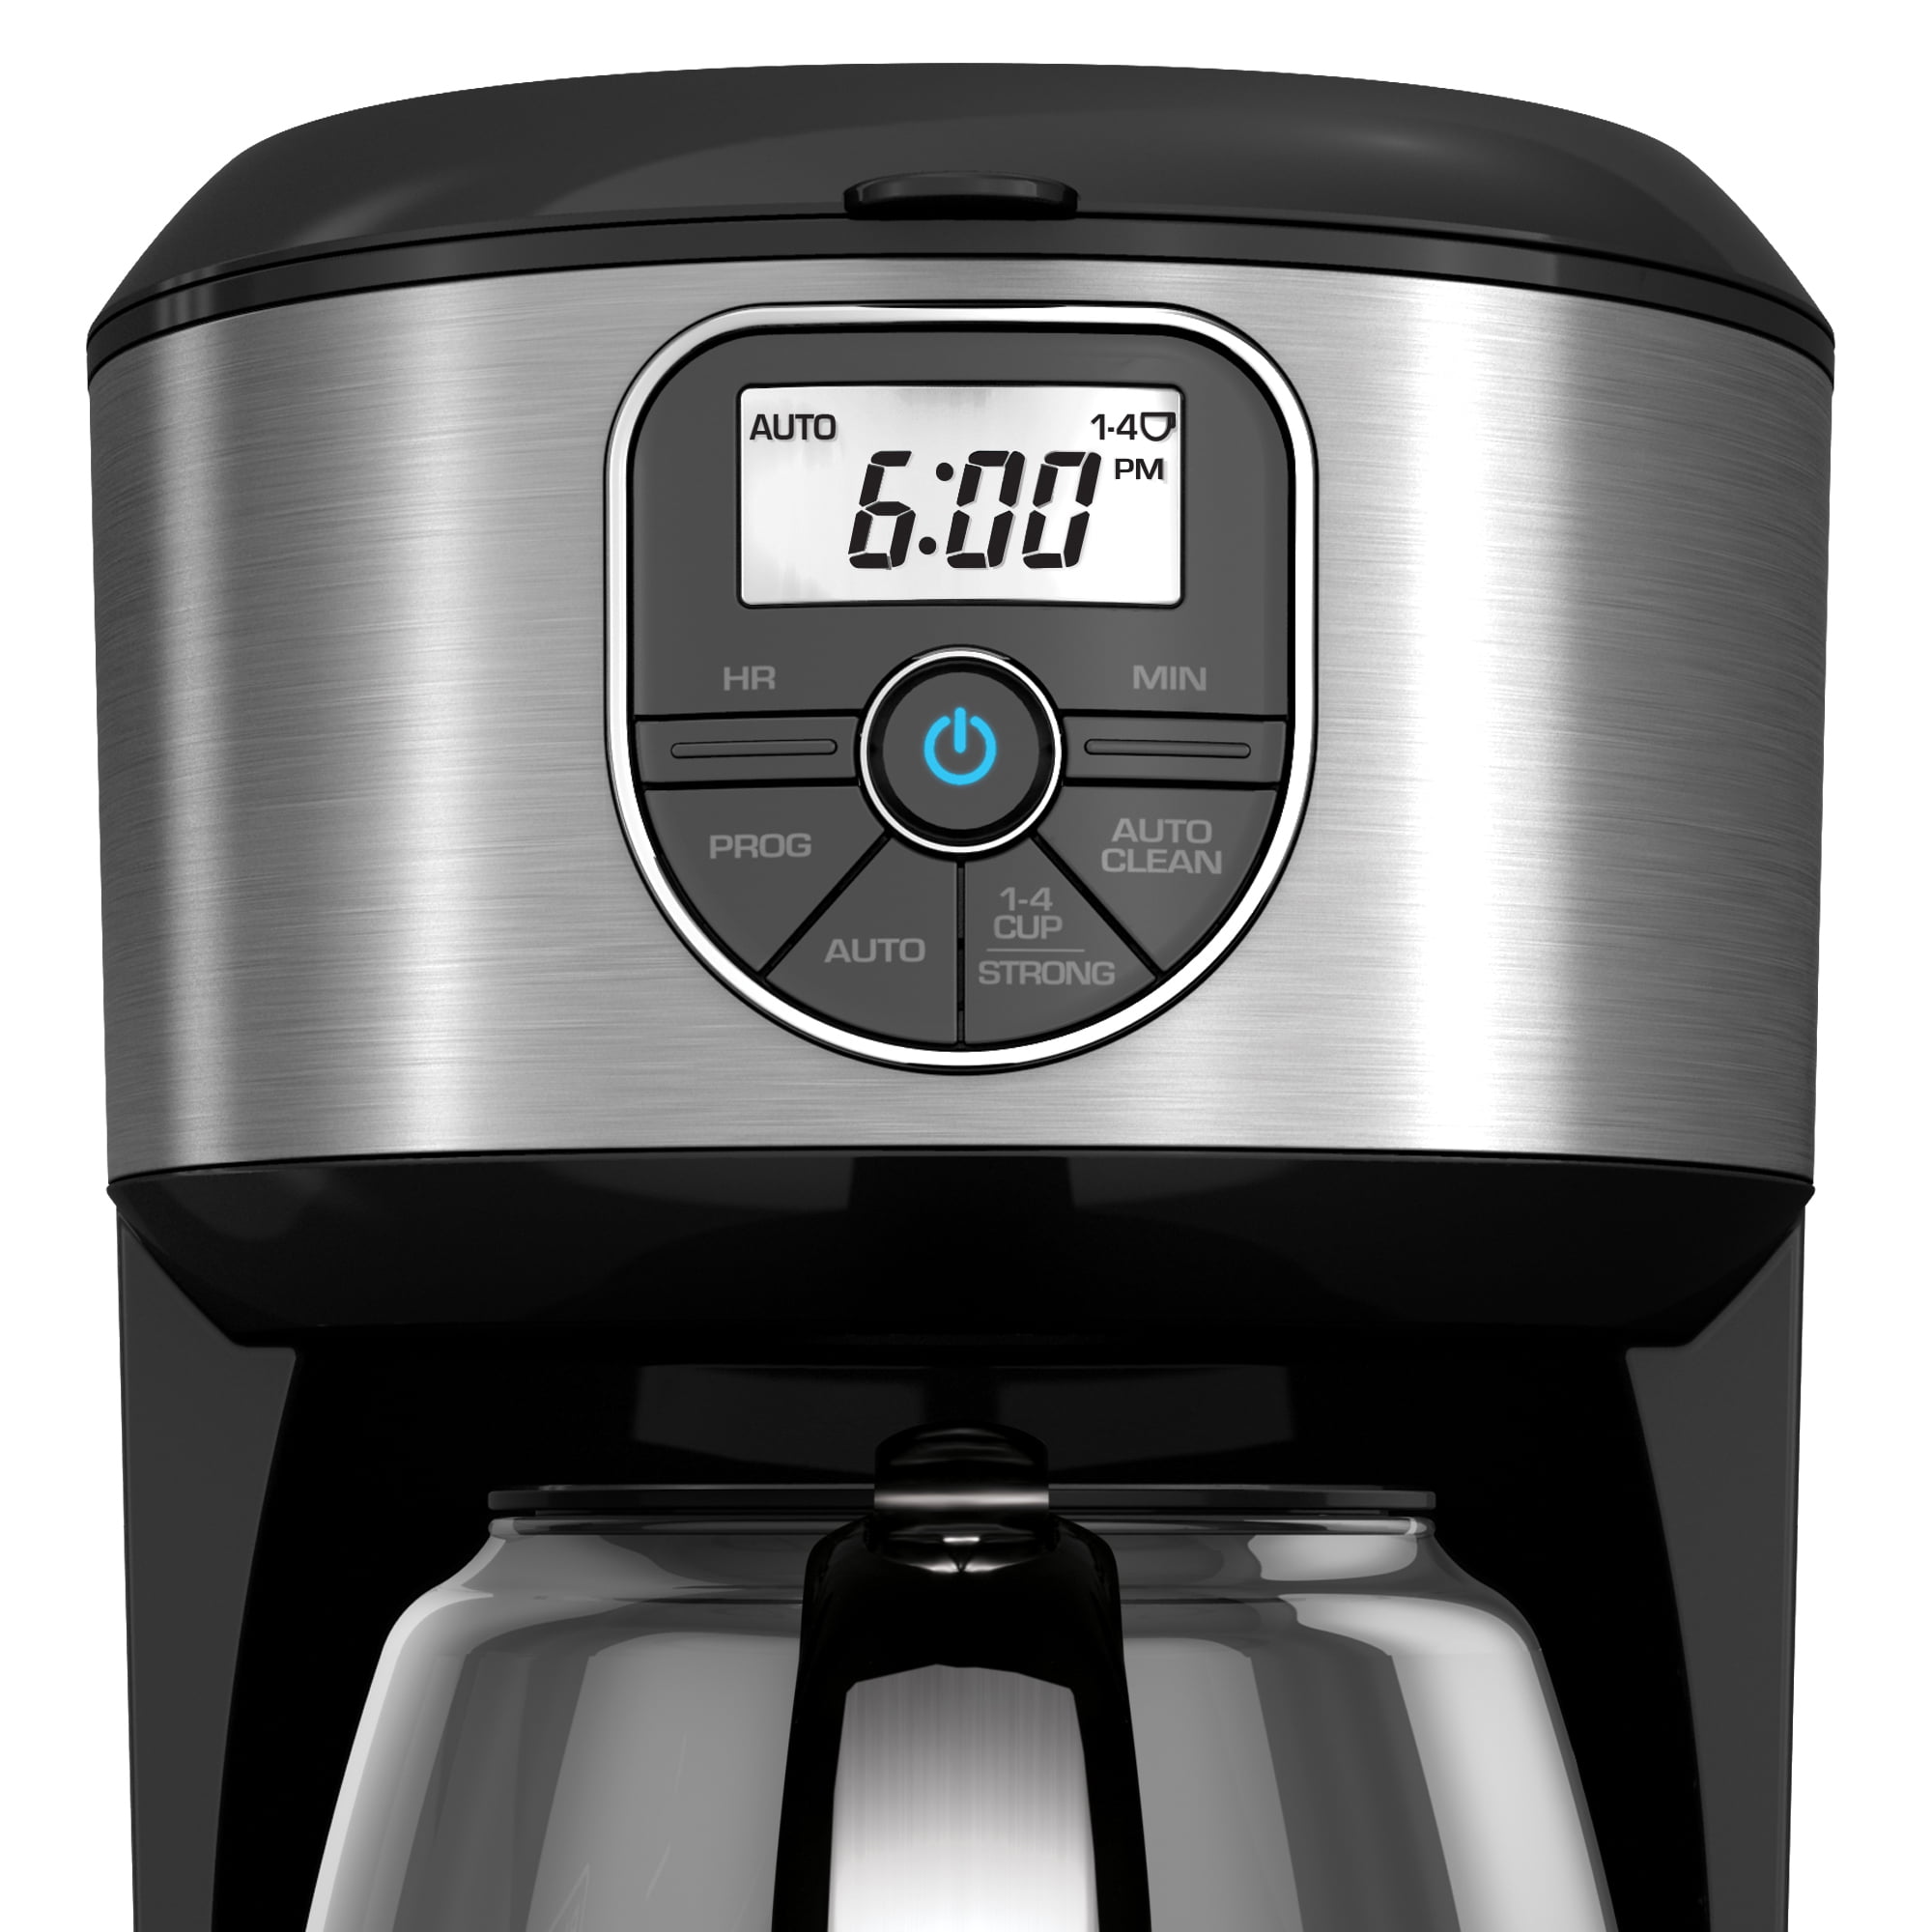 Black+Decker 12-cup CM4110S Coffee Maker Review - Consumer Reports